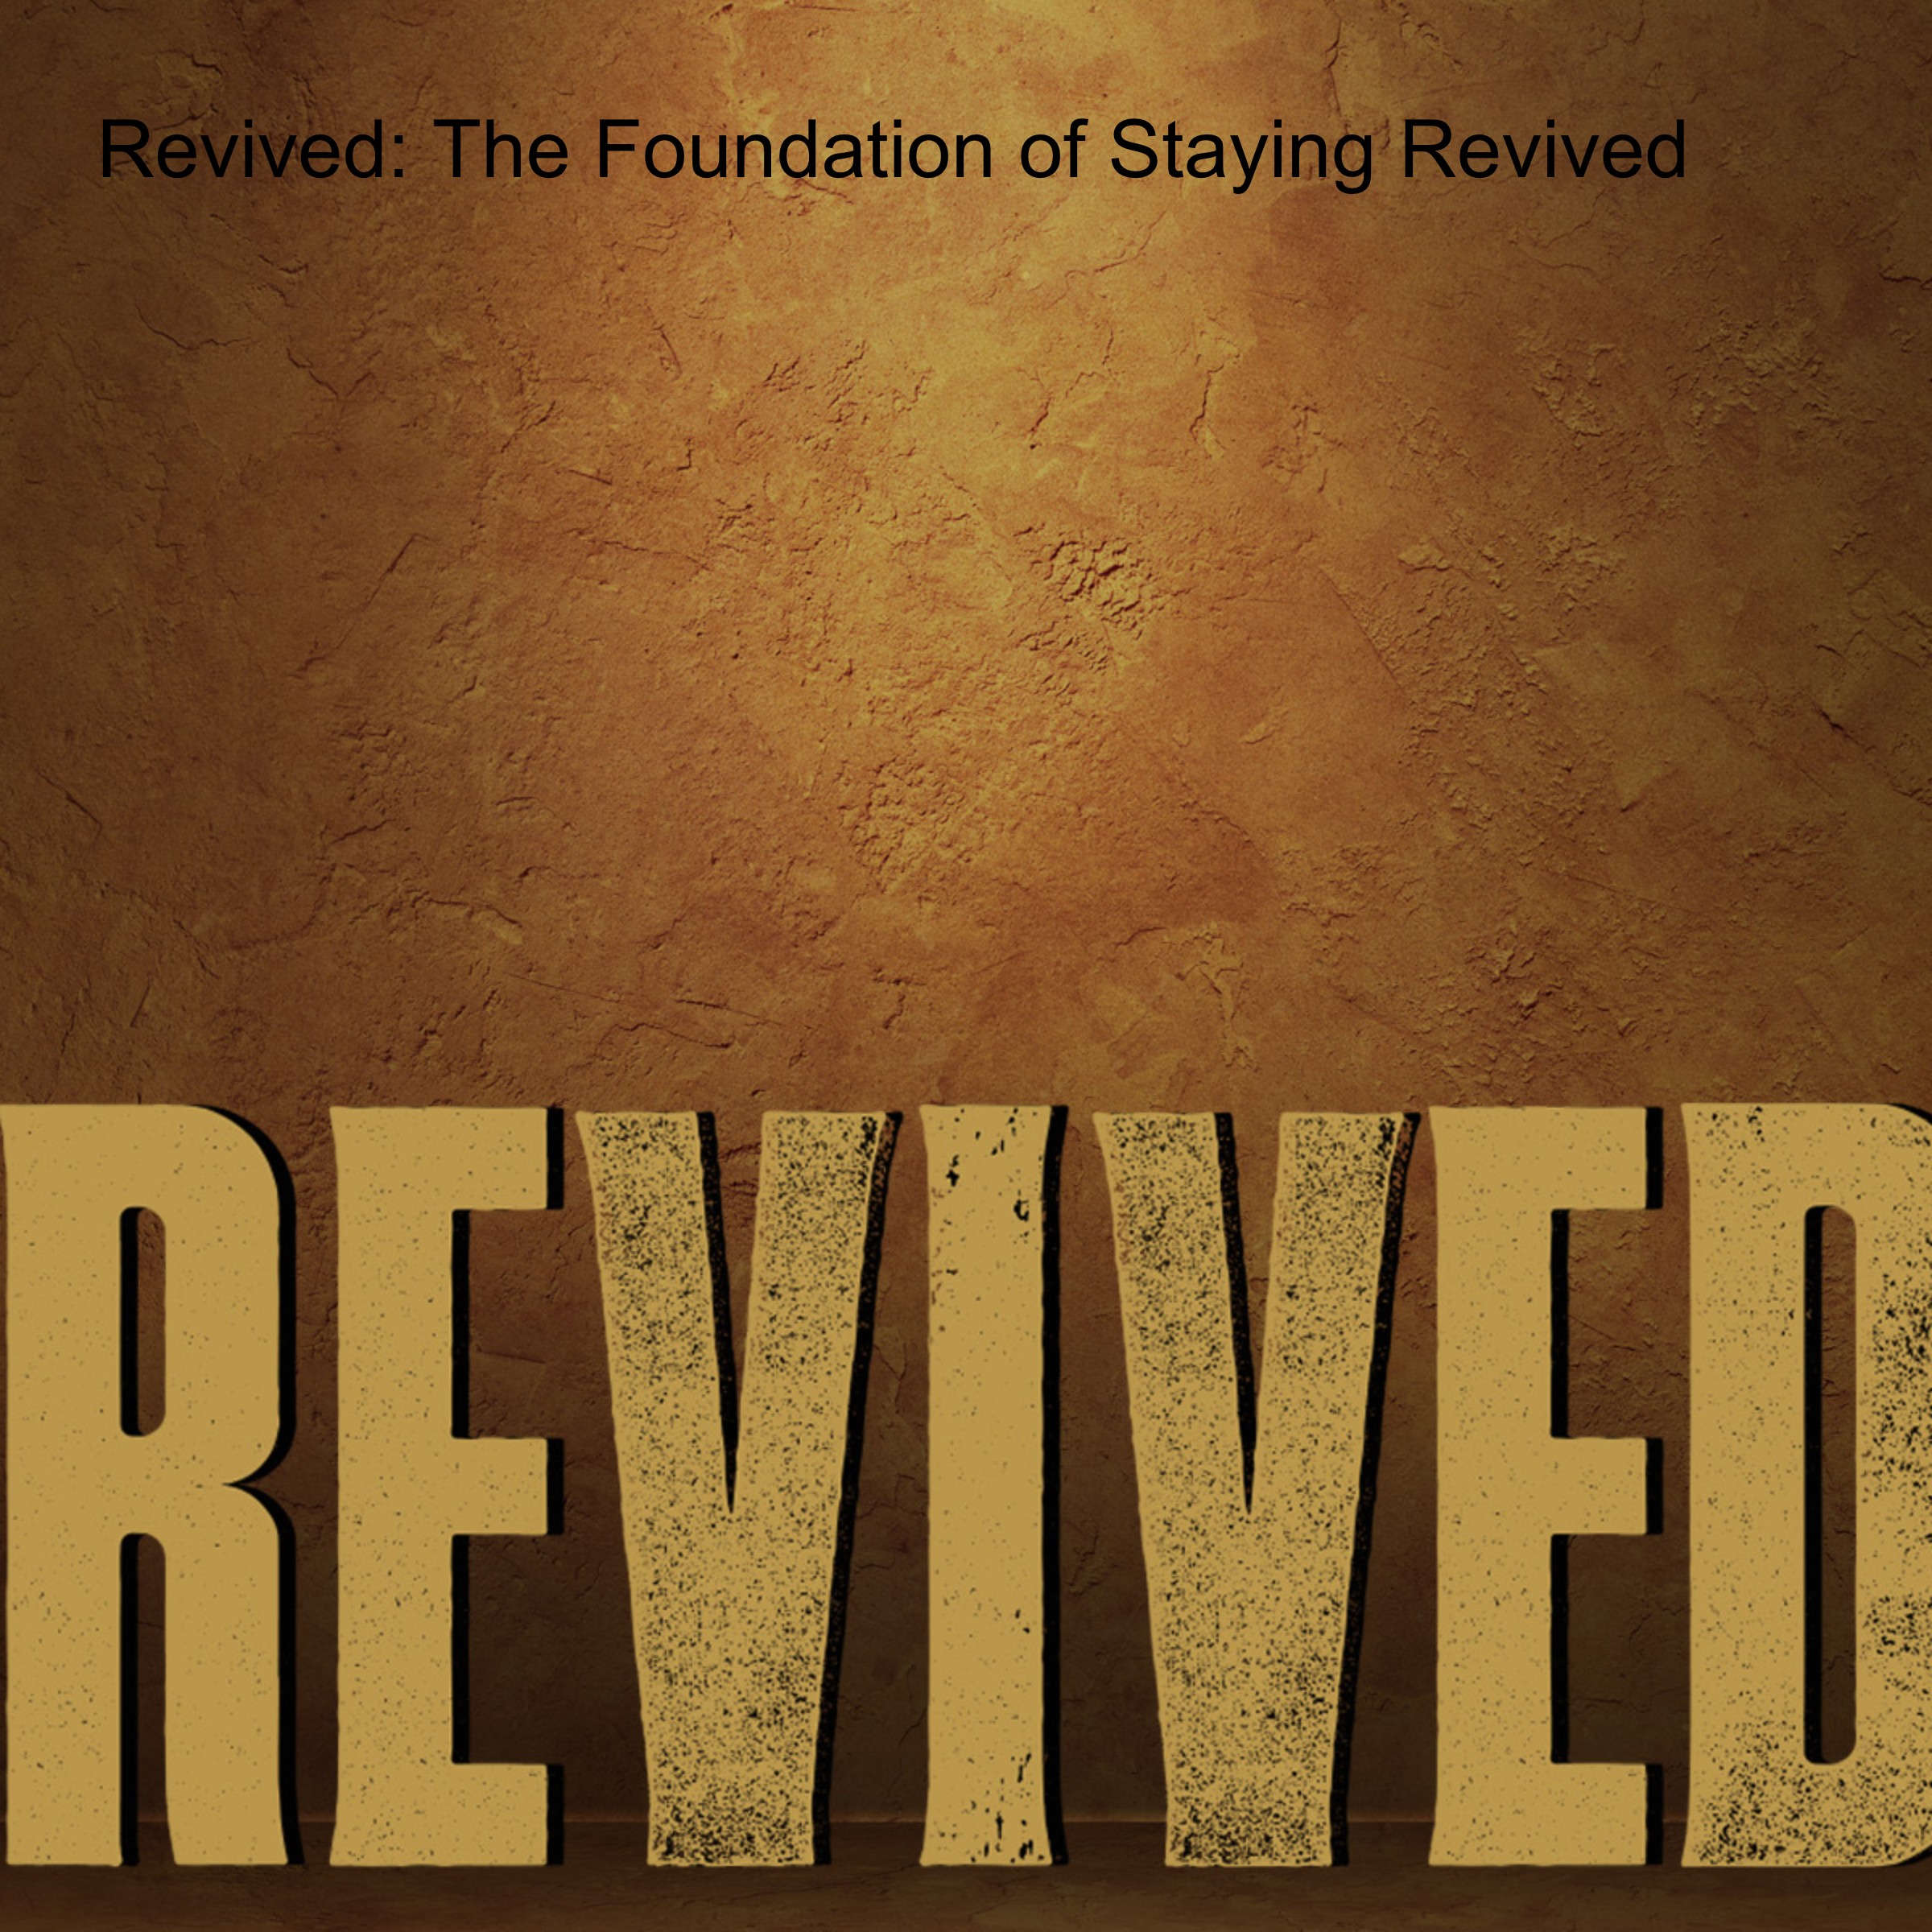 Revived: The Foundation of Staying Revived